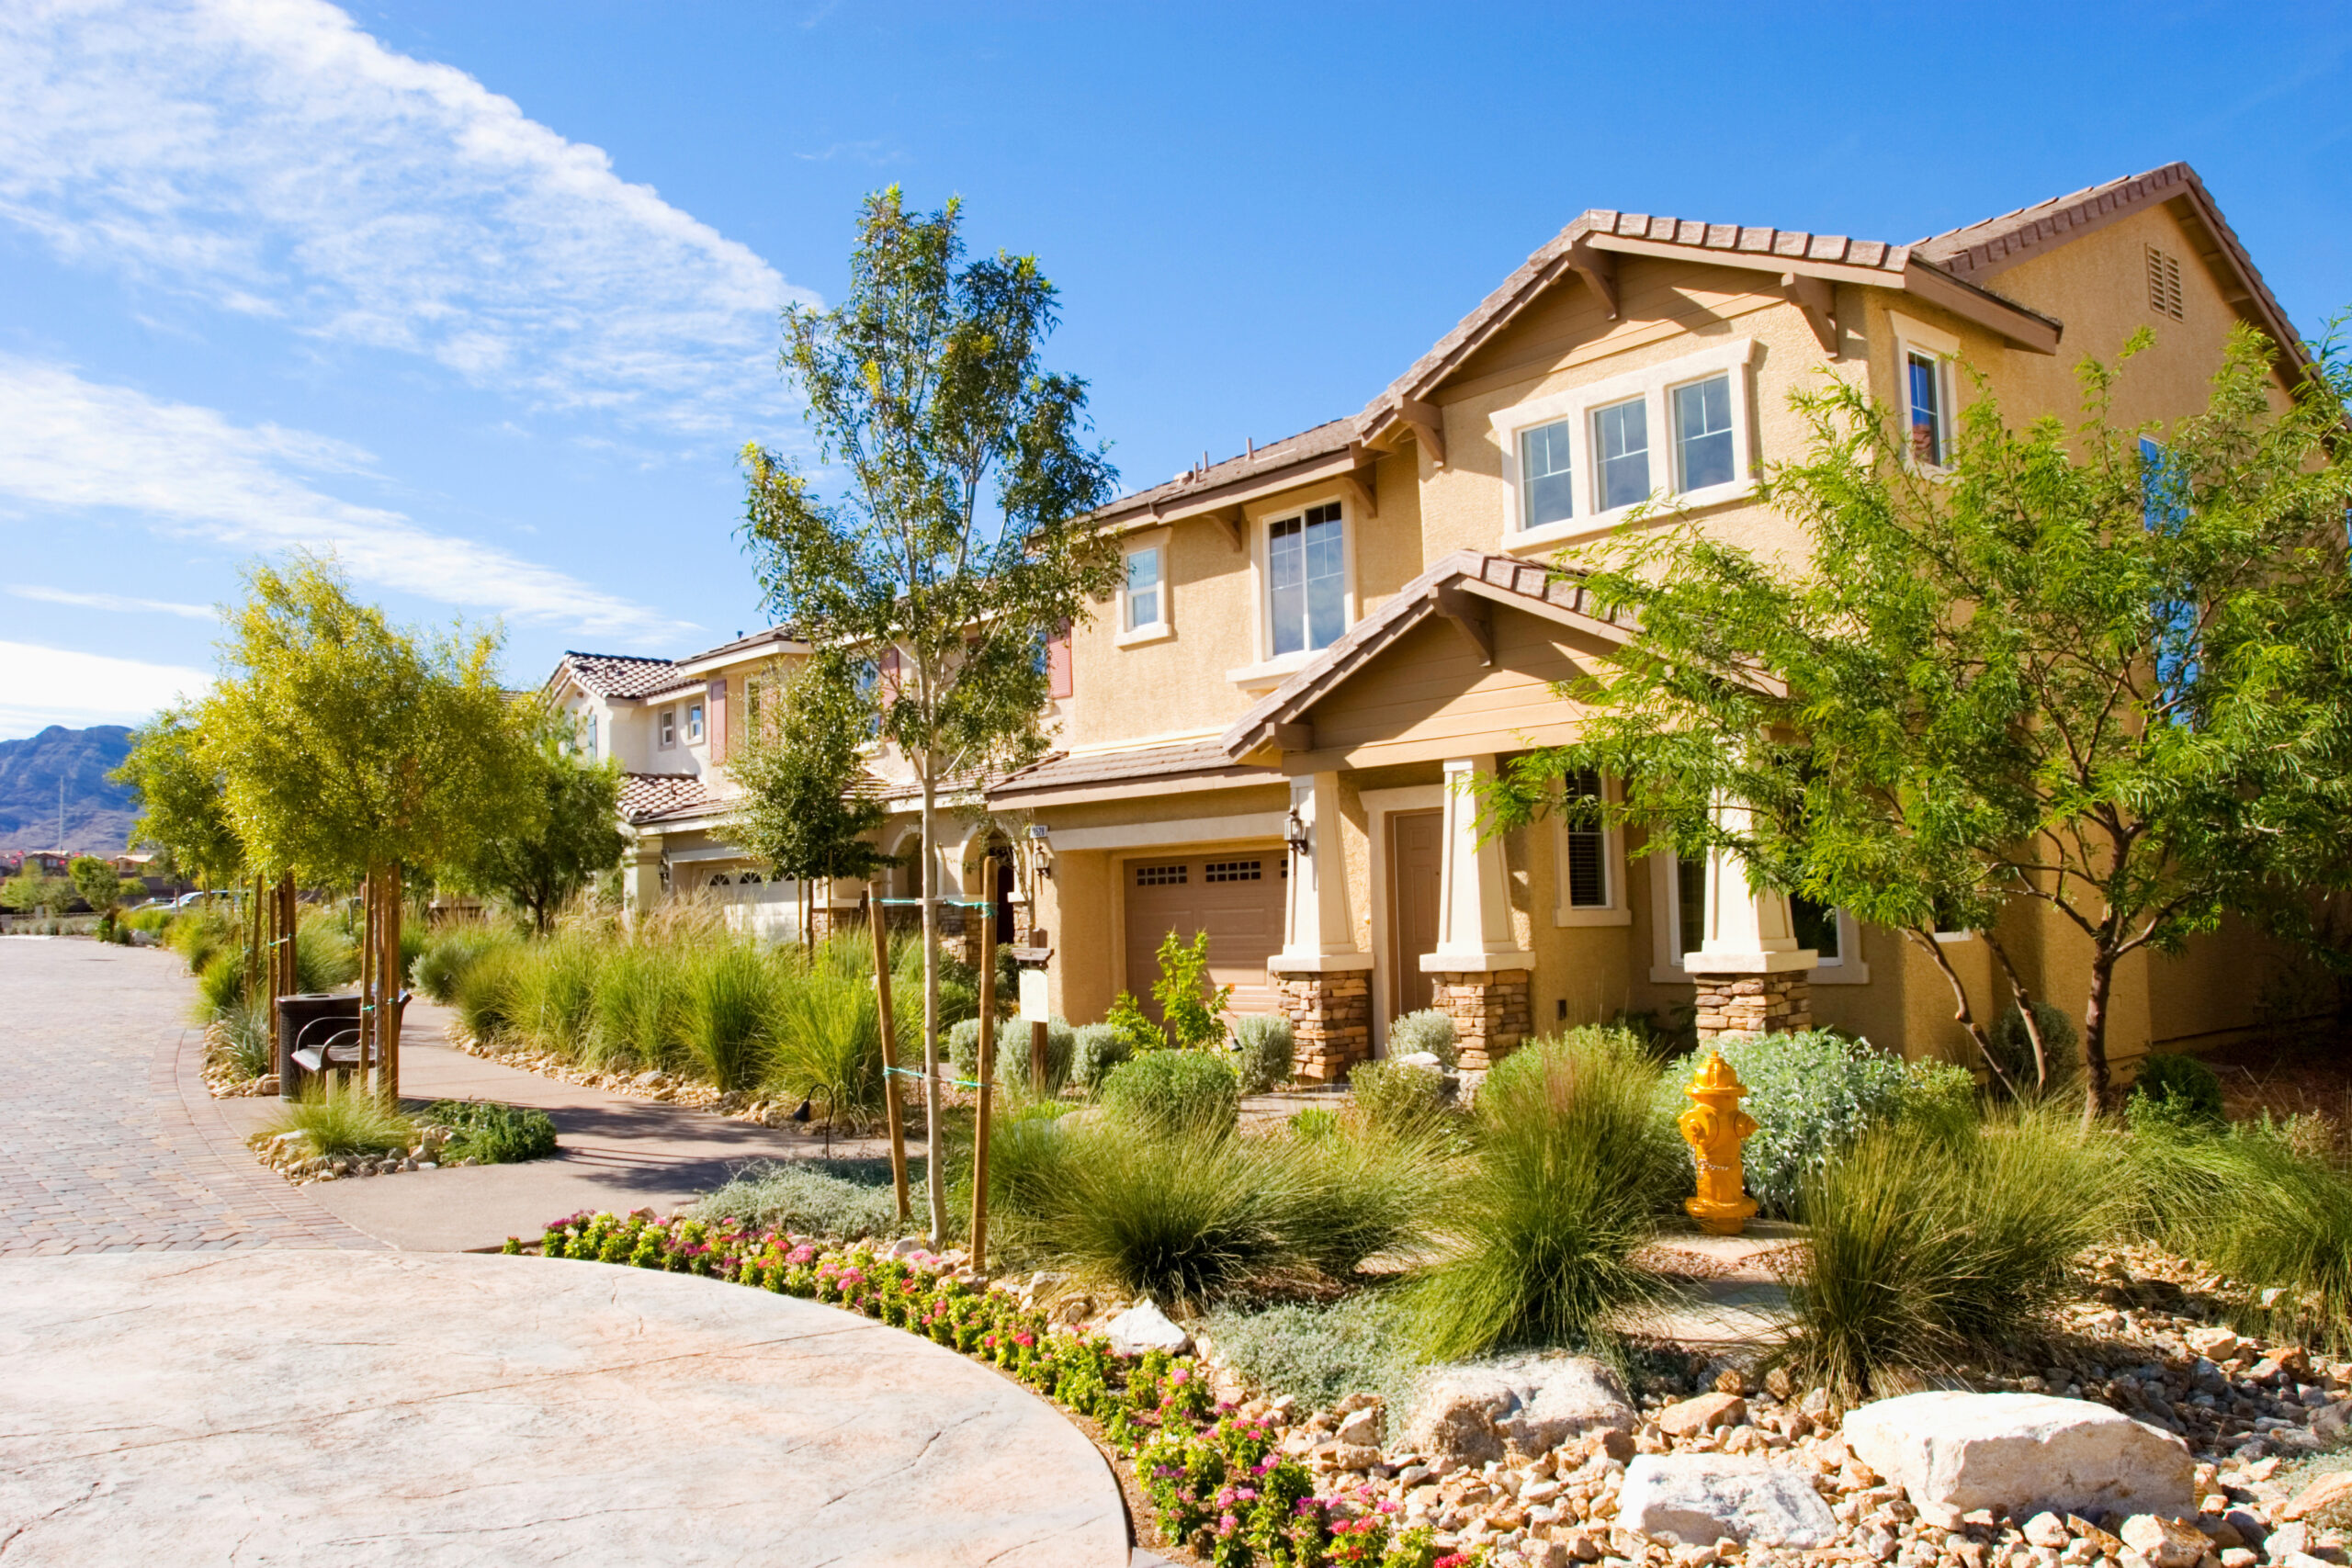 Vibrant landscaping in front of multiple two-story homes in the southwest.